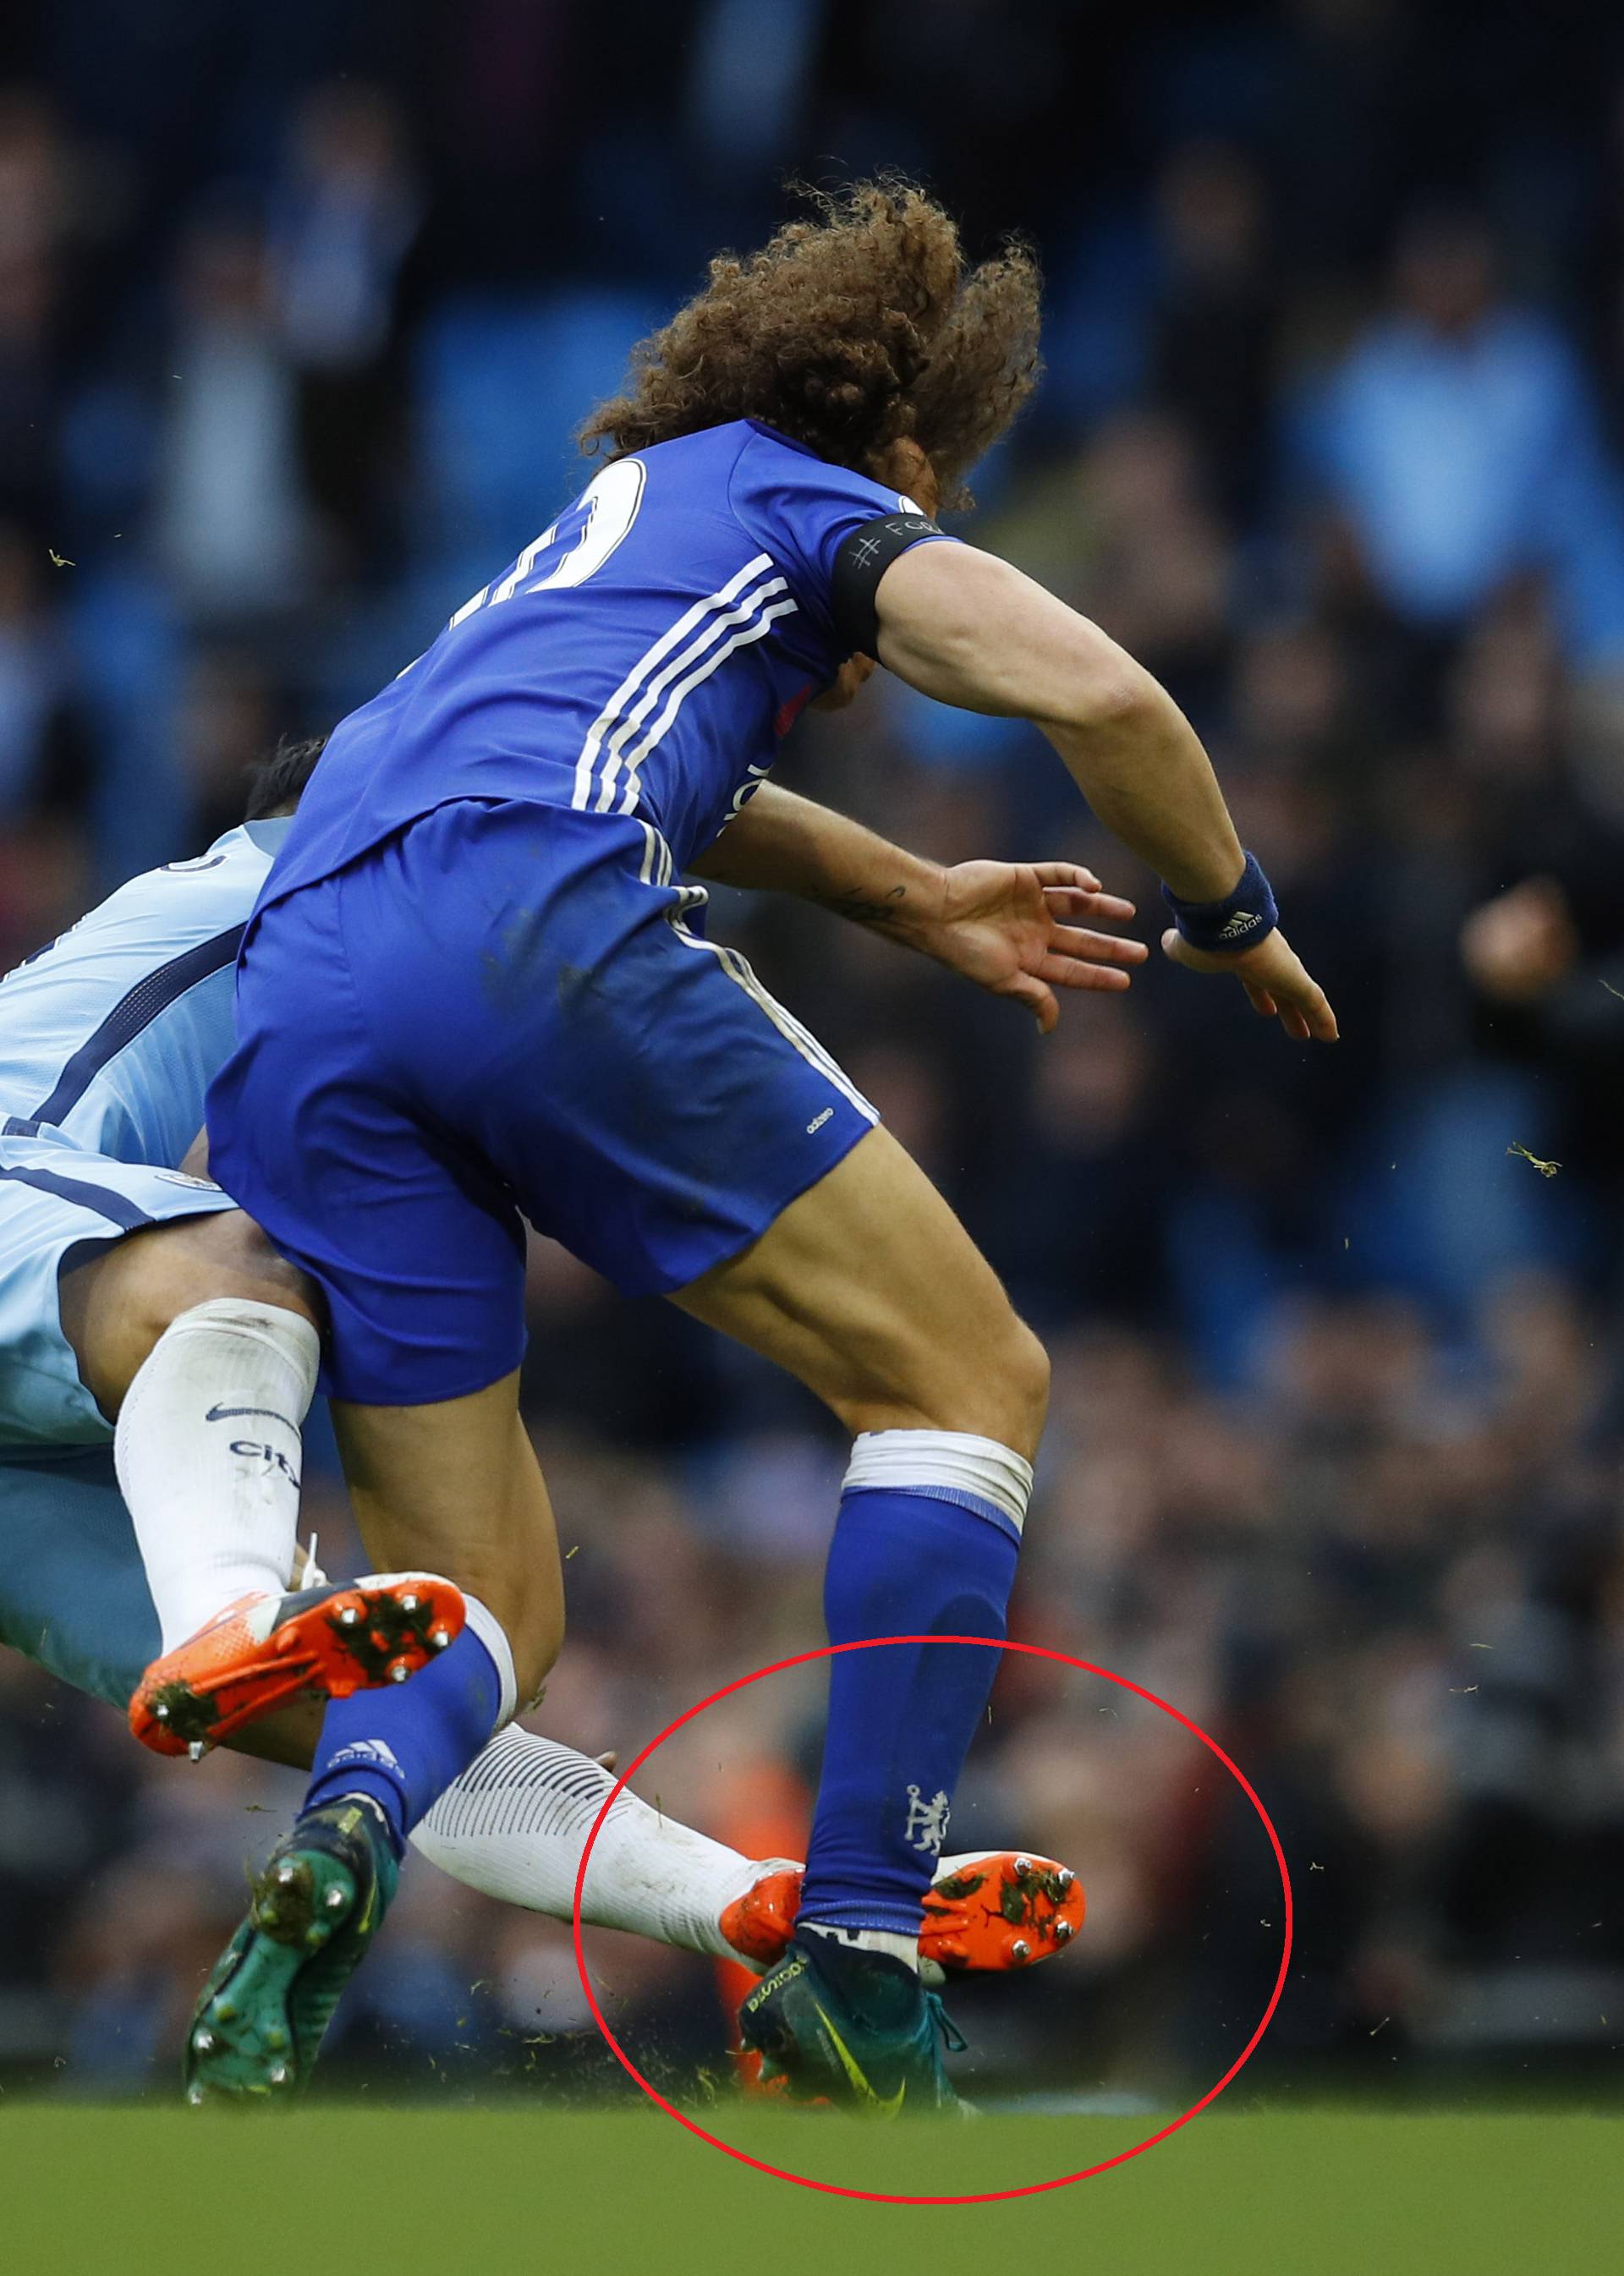 Manchester City's Sergio Aguero is sent off for this challenge on Chelsea's David Luiz